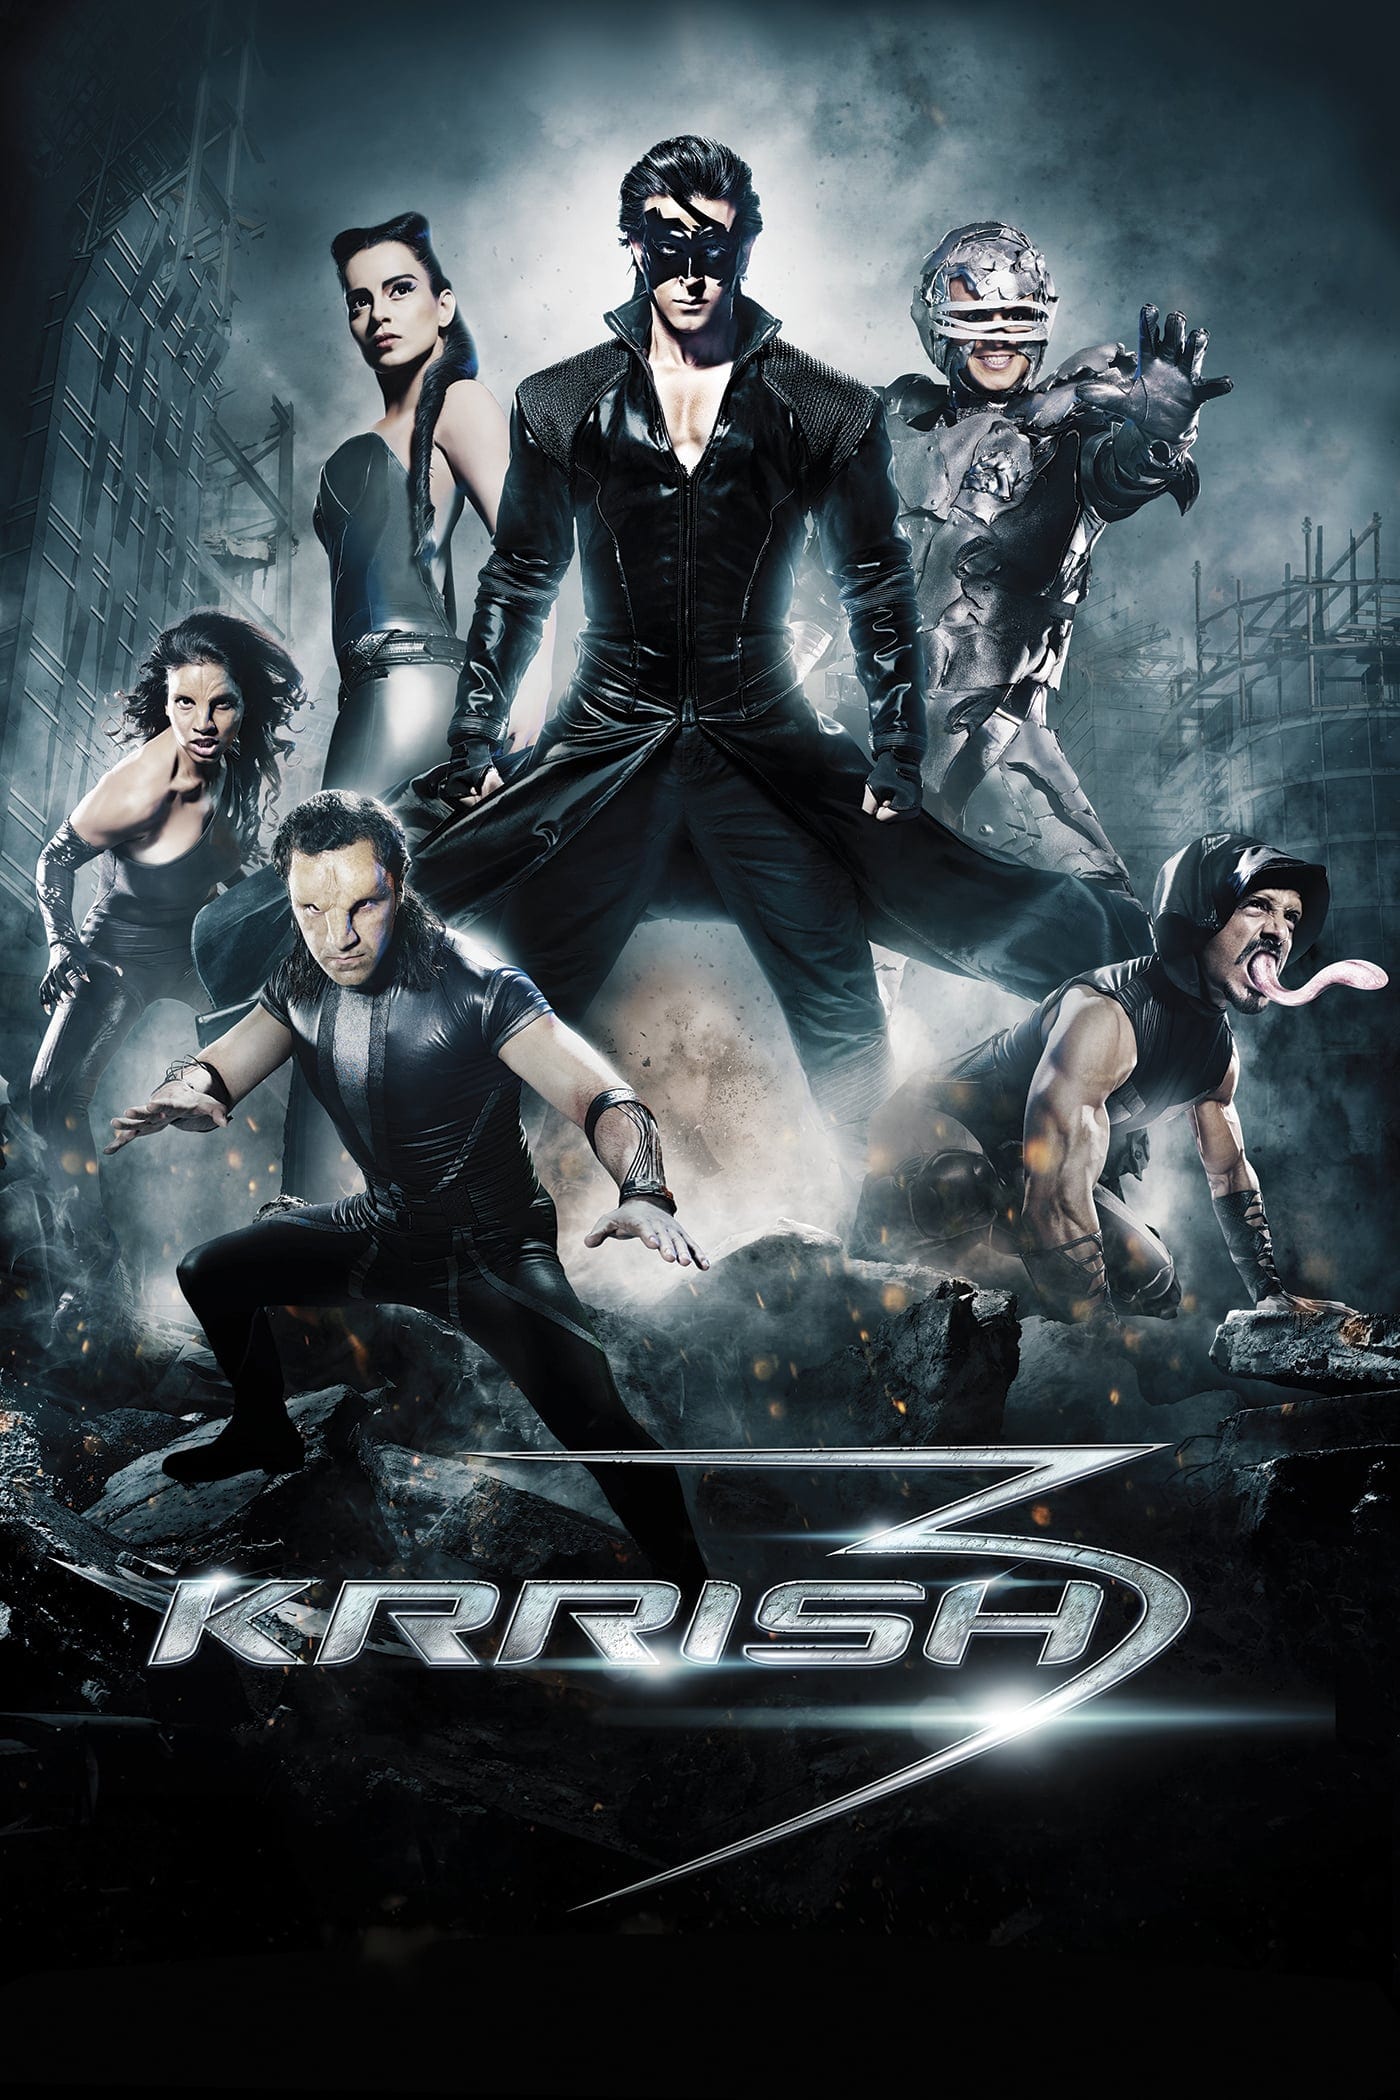 Poster for the movie "Krrish 3"